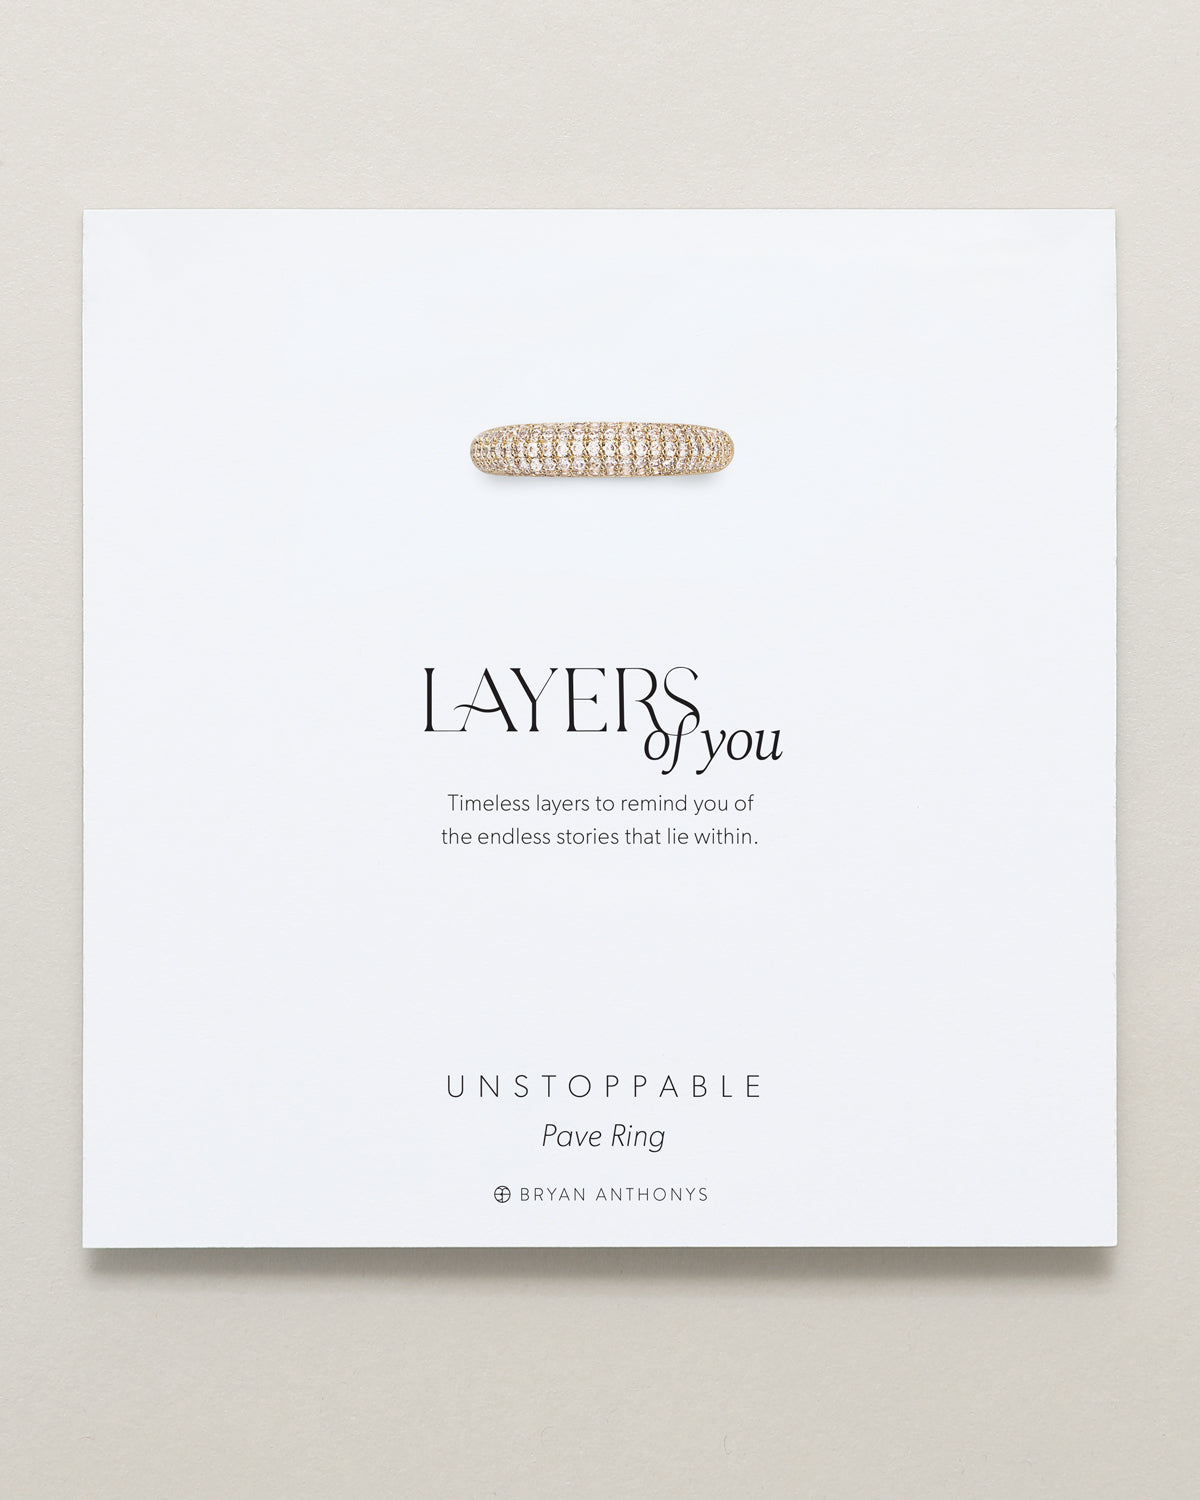 Bryan Anthonys Layers of You Unstoppable Pave Ring Gold